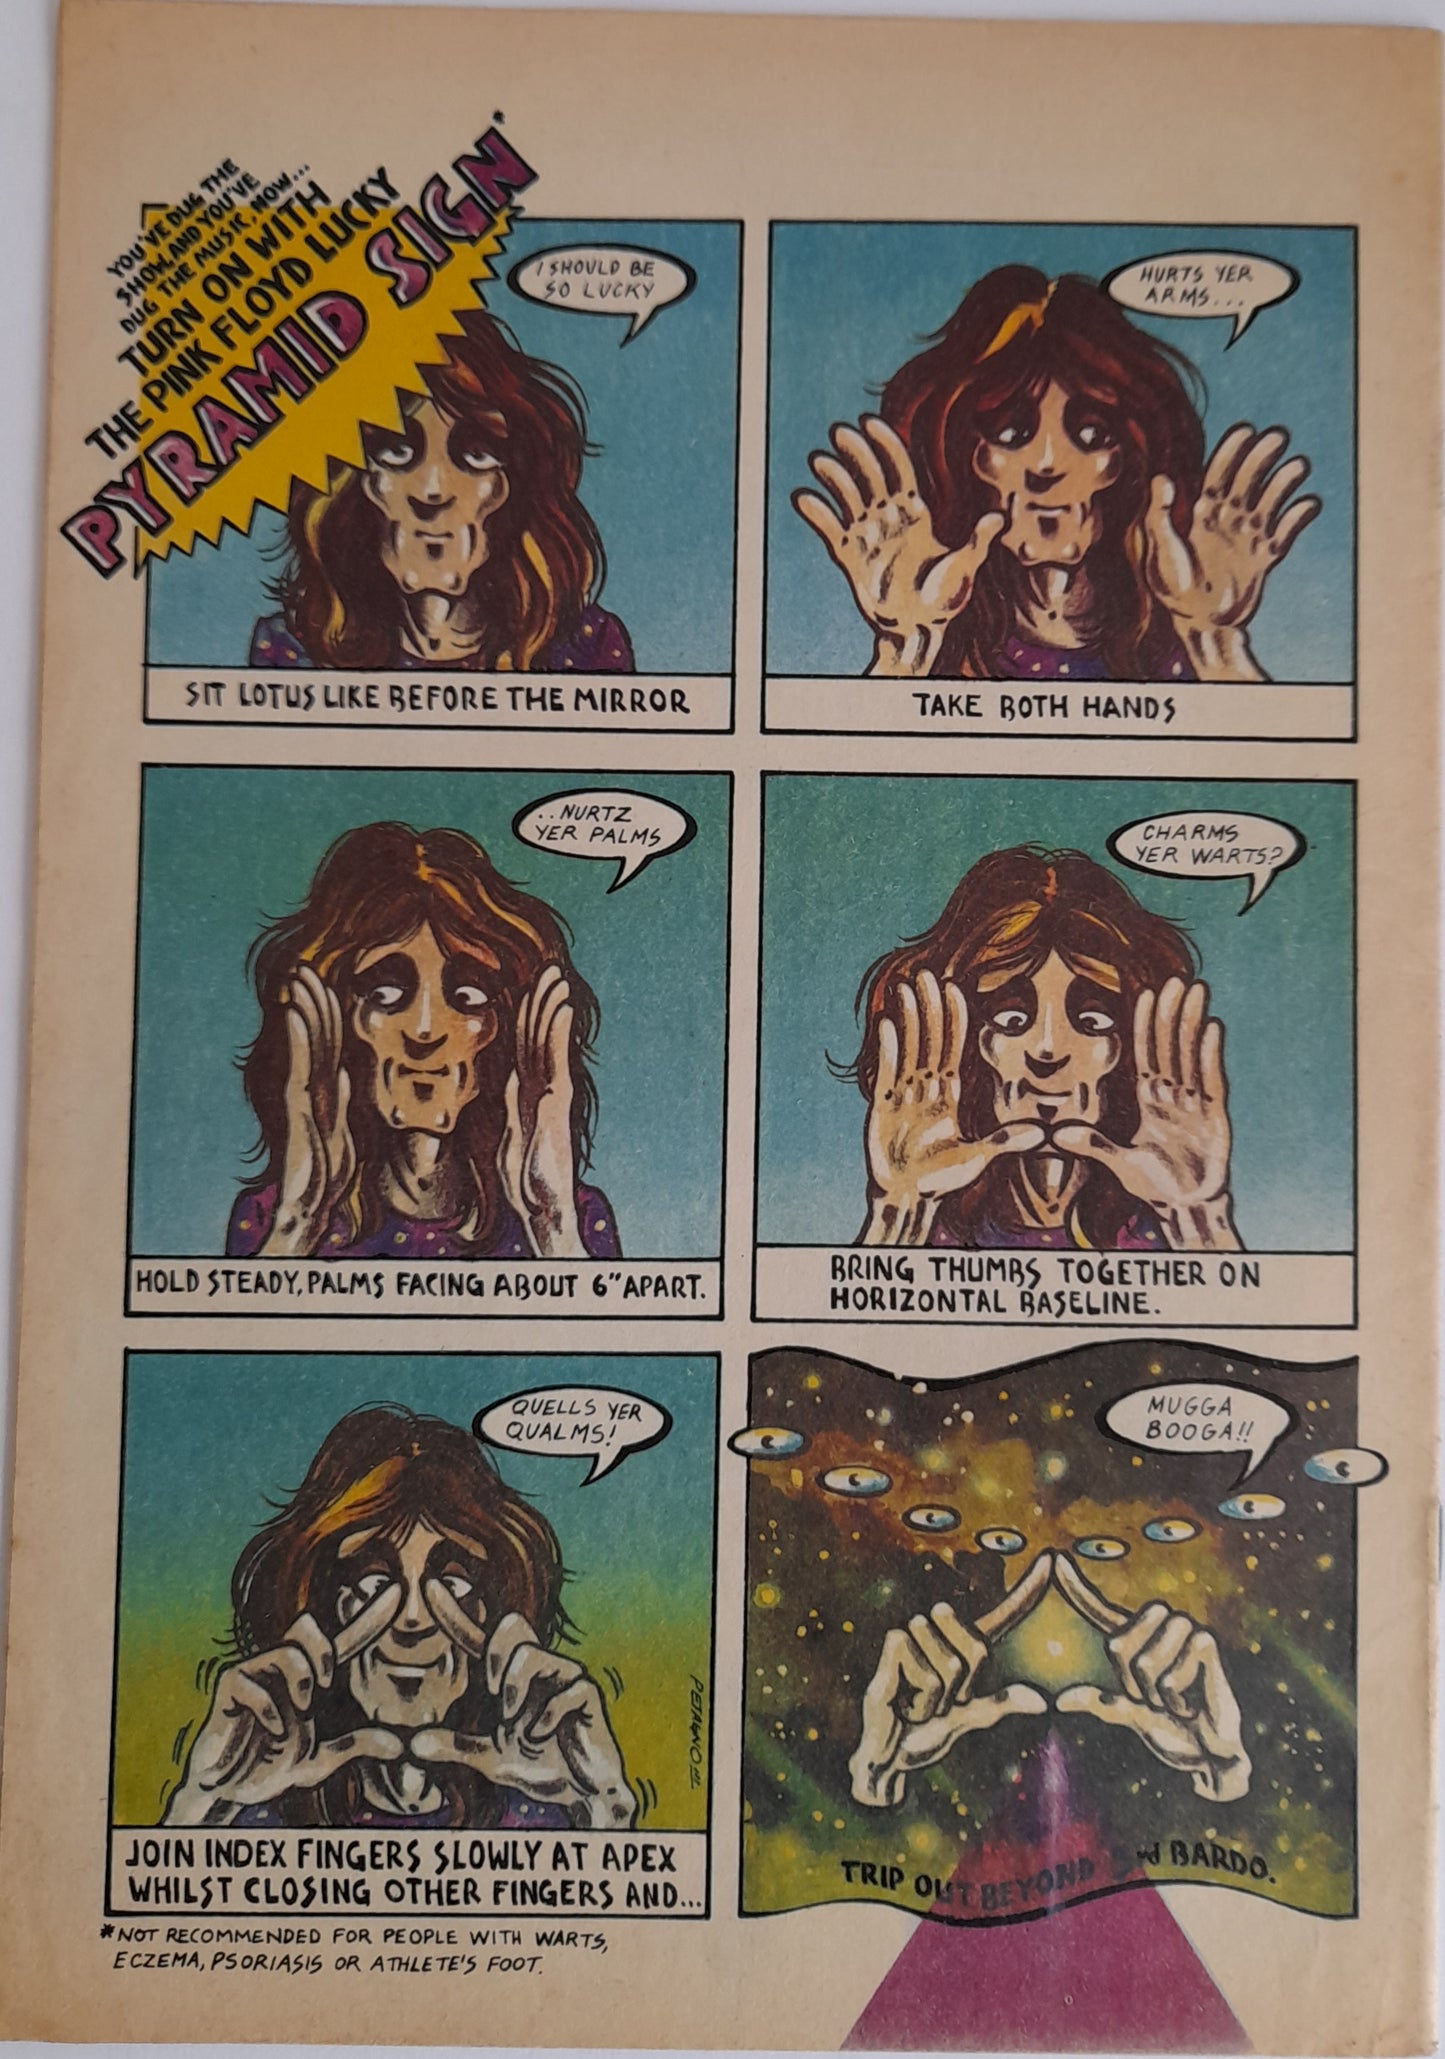 The Pink Floyd Super All-Action Official Music Comic/Programme 1974 Plus Flyer and Ticket Stub